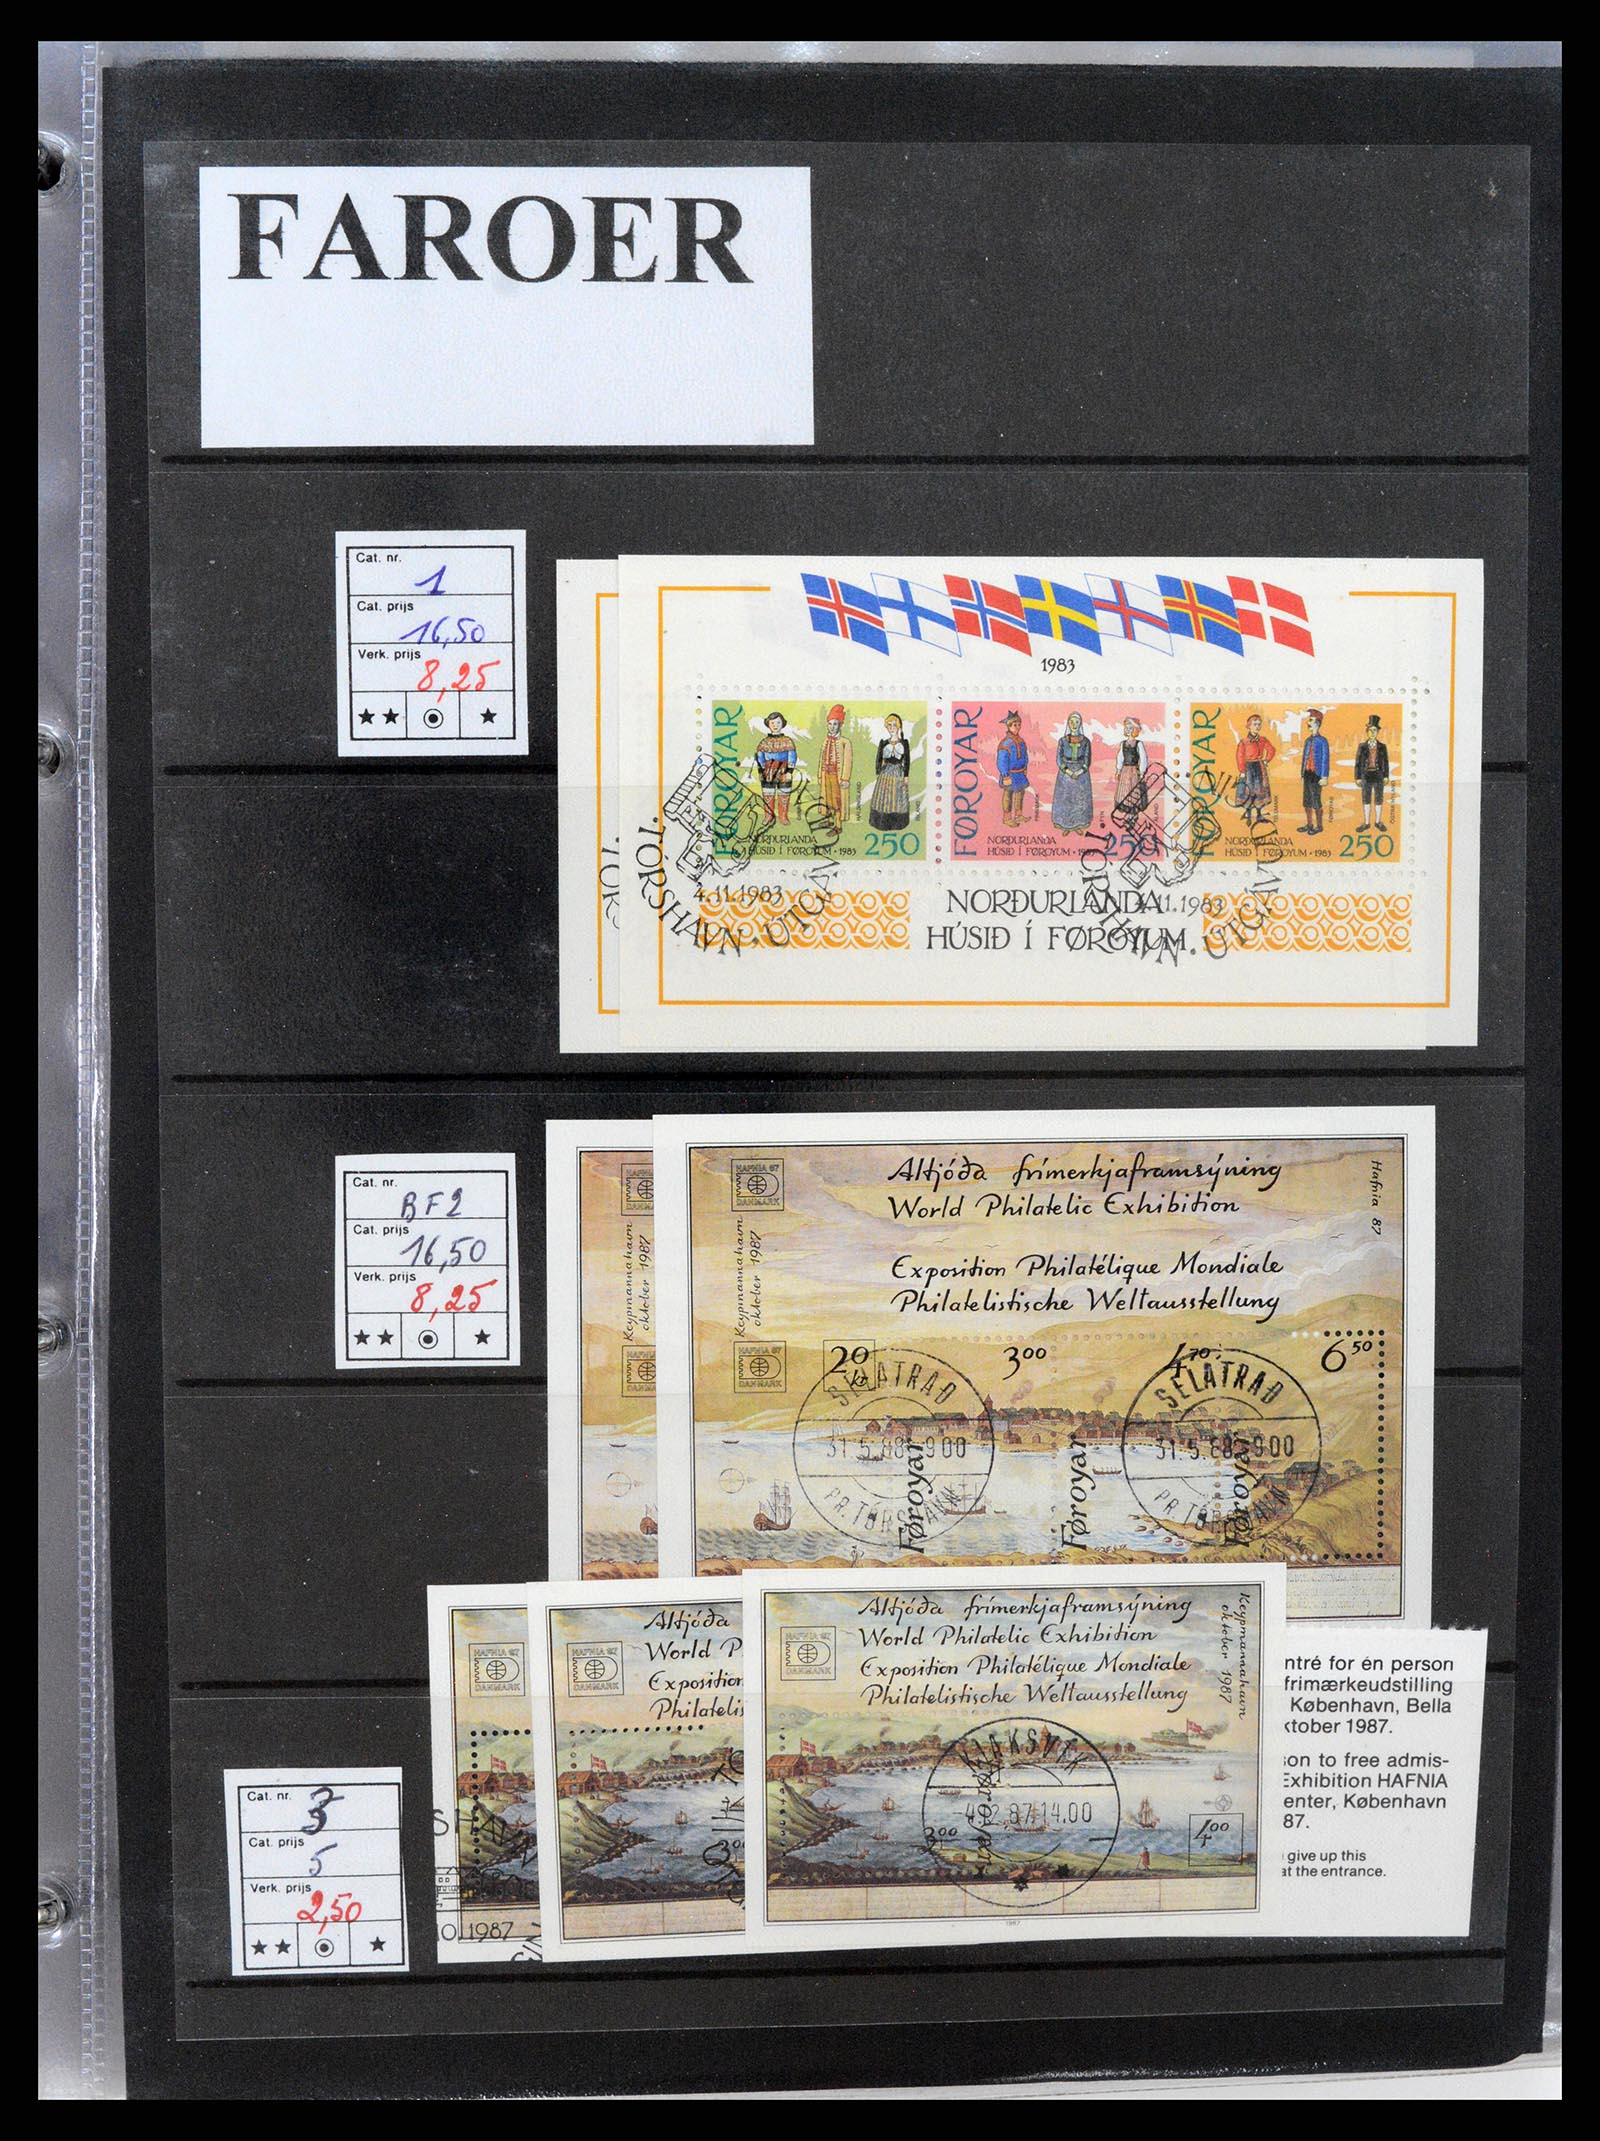 37192 098 - Stamp collection 37192 European countries souvenir sheets and booklets 1